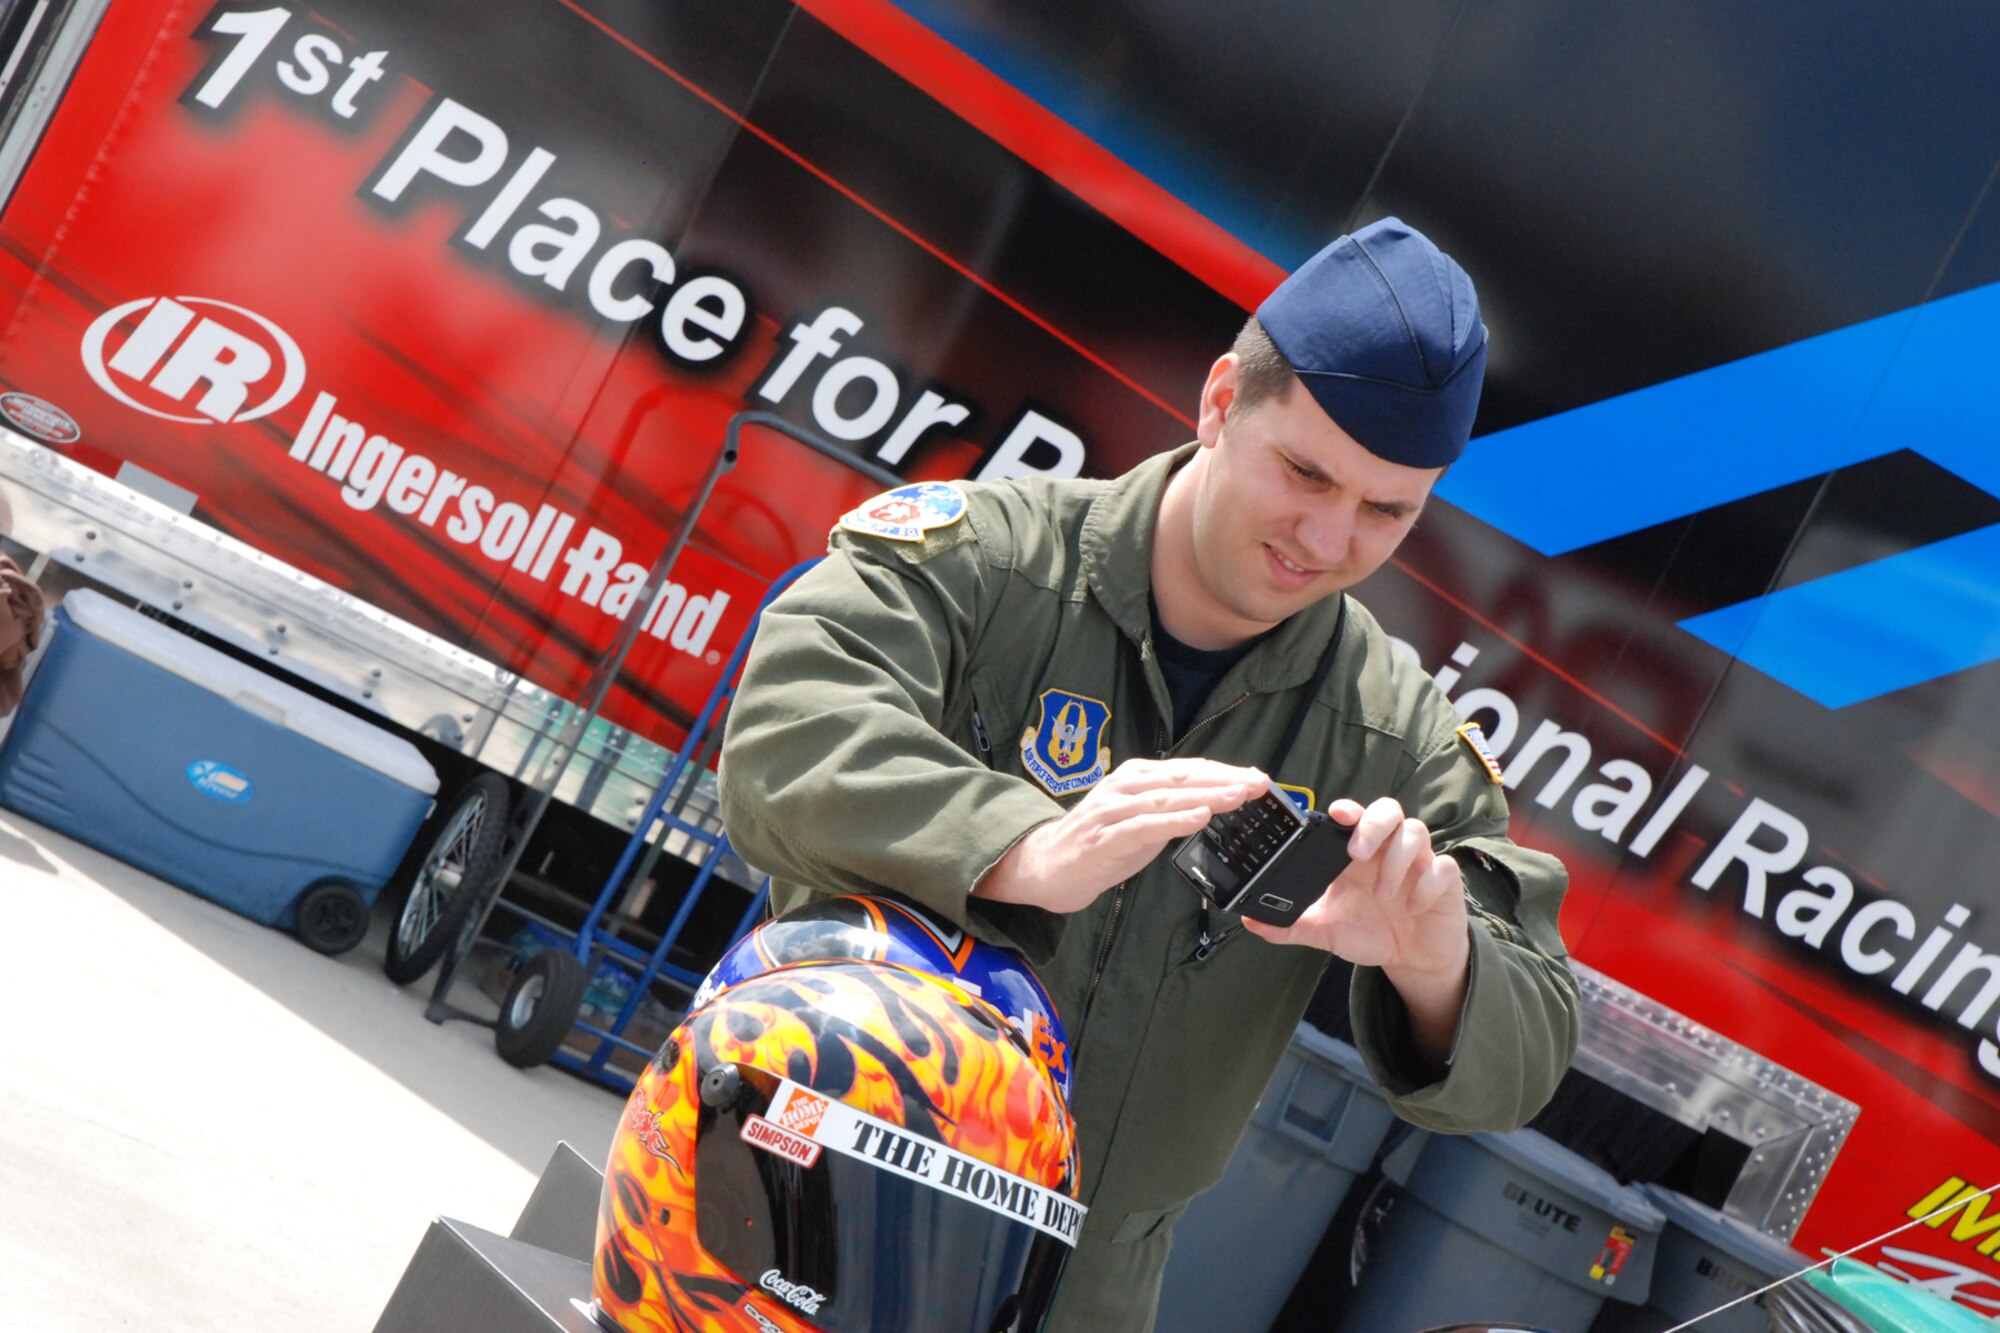 ATLANTA MOTOR SPEEDWAY, Ga. - Tech Sgt. Matt Ripley, 700th Airlift Squadron loadmaster, photographs a NASCAR helmet during his guest-of-honor visit at the American Commercial Lines 200 NASCAR Camping World Truck Series race on March 7. (U.S. Air Force photo/Tech. Sgt. James Branch)